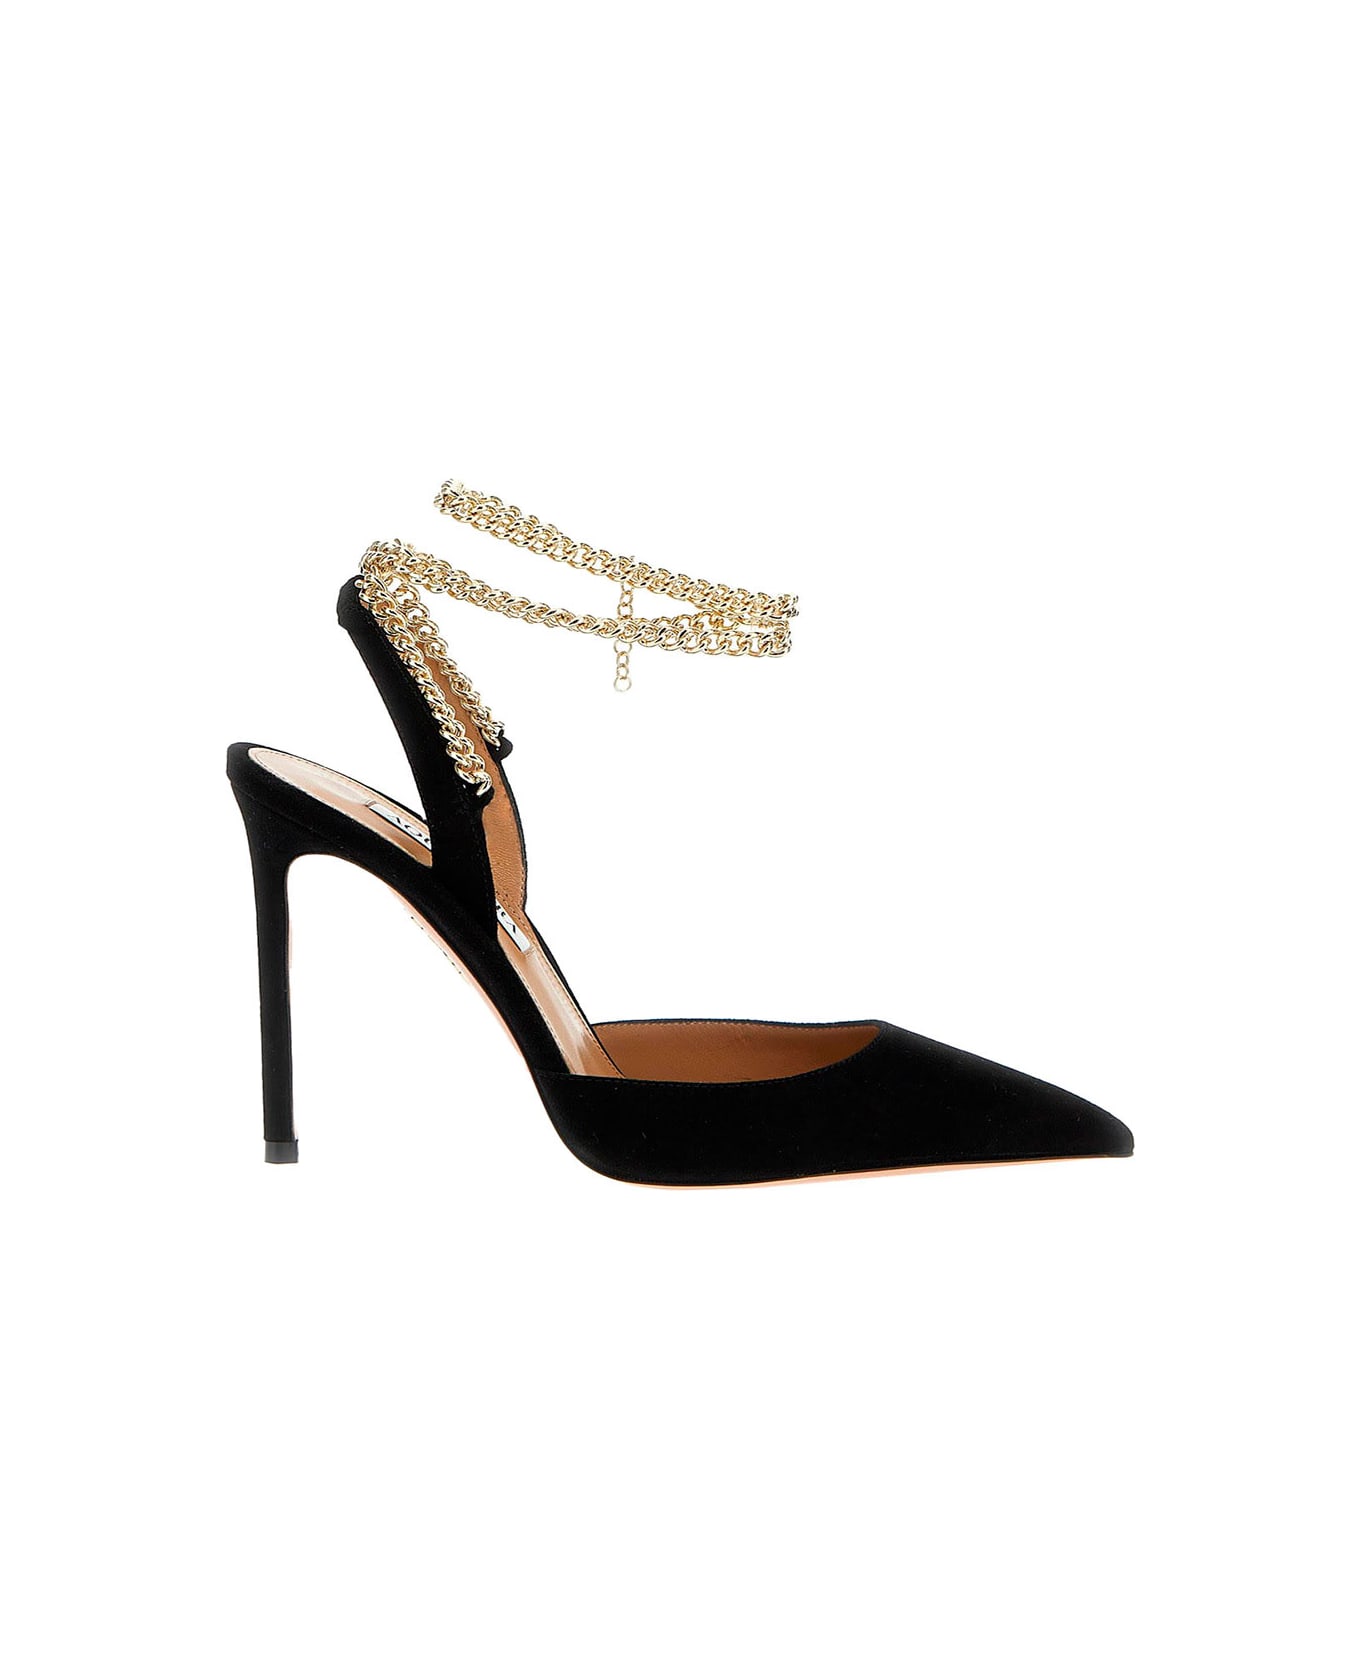 Aquazzura Black Slingback Pumps With Chain Ankle Strap In Leather Woman - Black